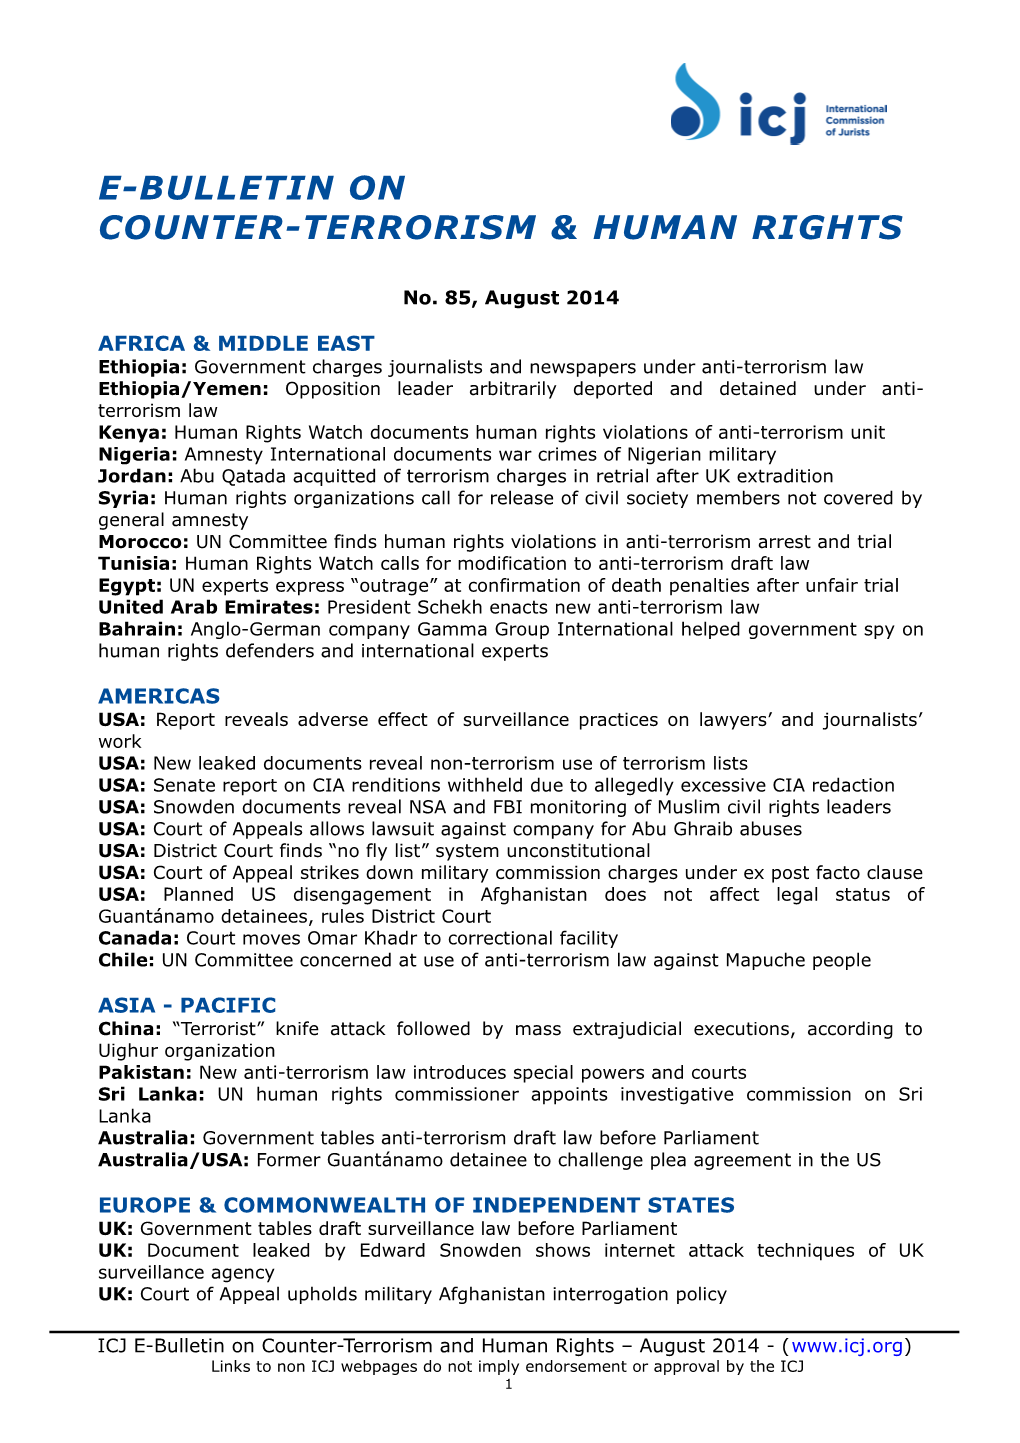 E-Bulletin on Counter-Terrorism and Human Rights